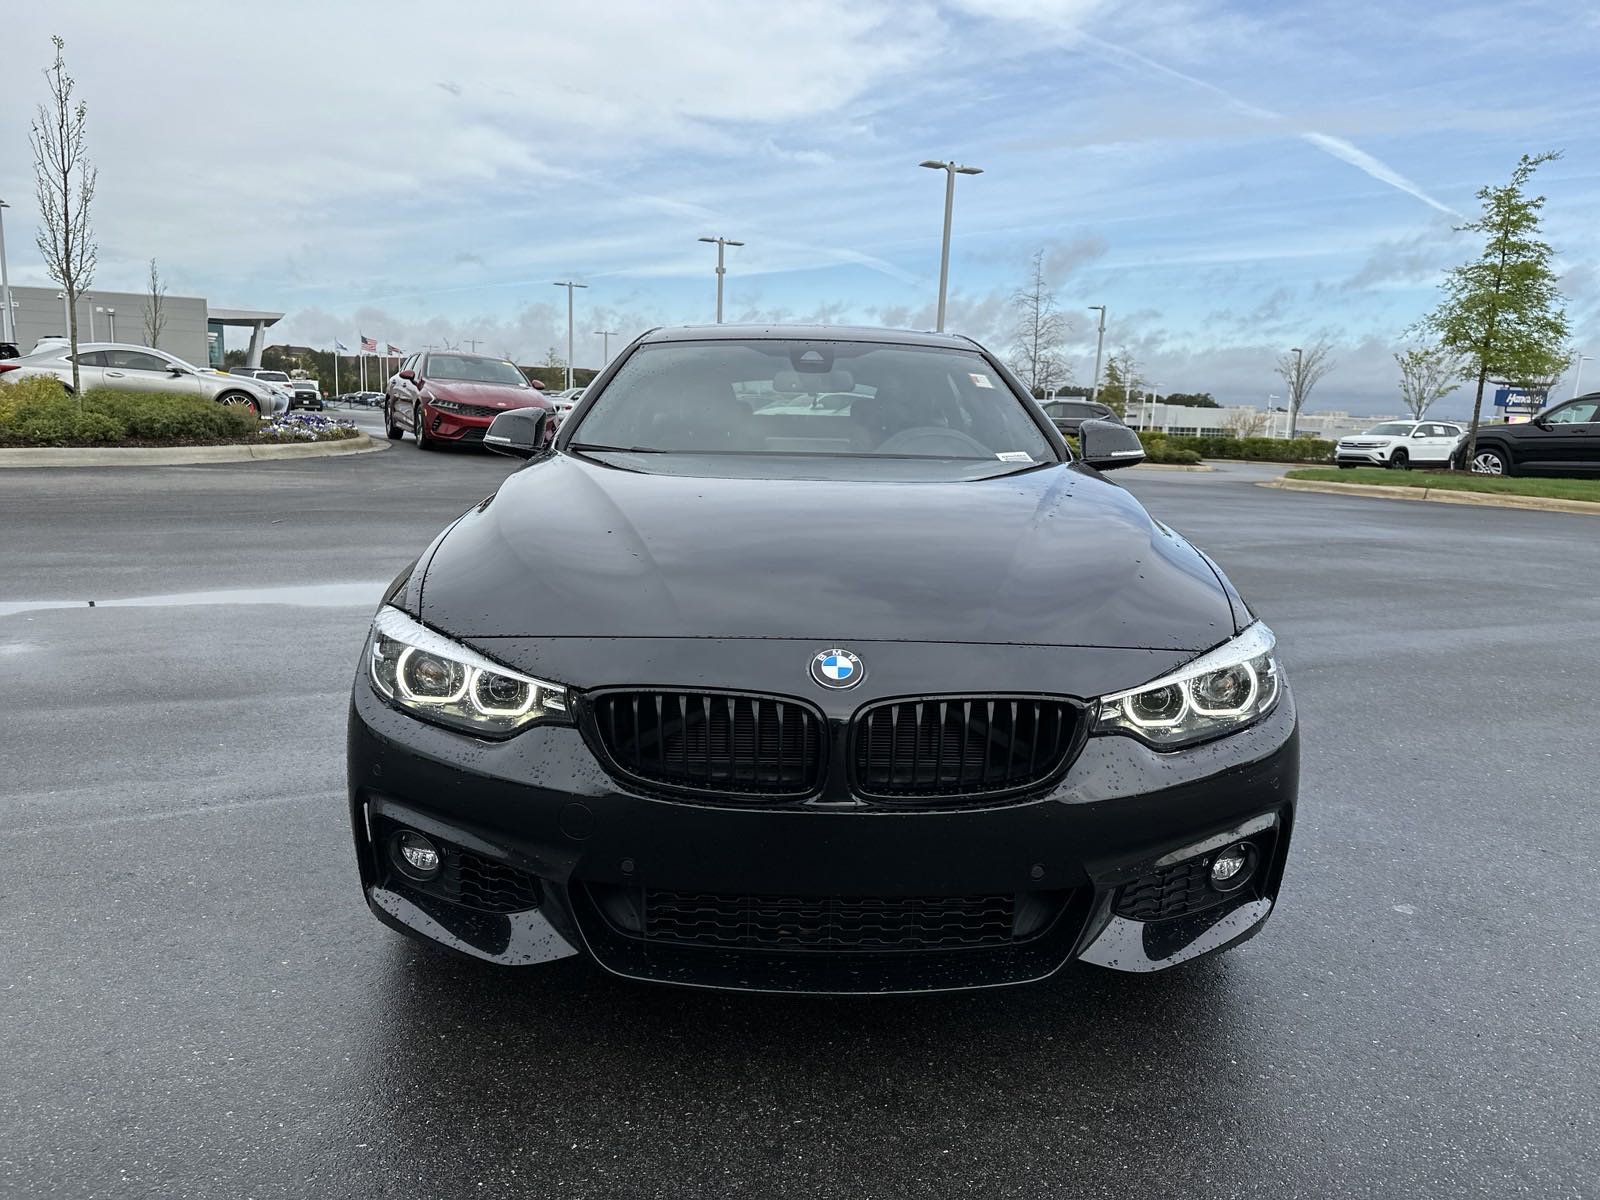 Pre-Owned 2020 BMW 4 Series 440i Gran Coupe Sedan in Merriam #Q200586A |  Hendrick Chevrolet Shawnee Mission